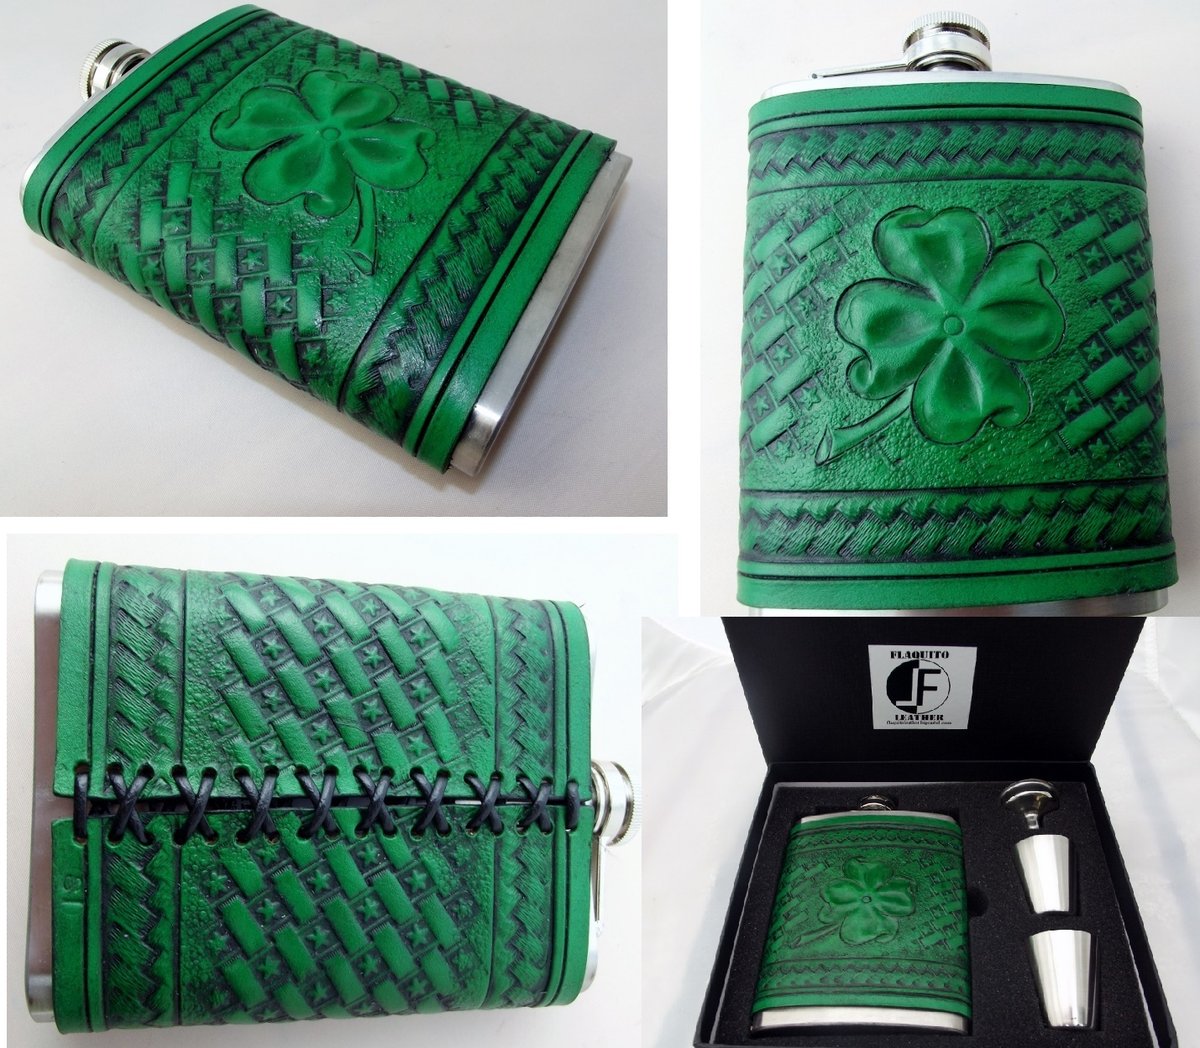 Download Flaquito Leather Custom Hand Tooled Leather Covered Flask Your Image Design Or Idea Yellowimages Mockups